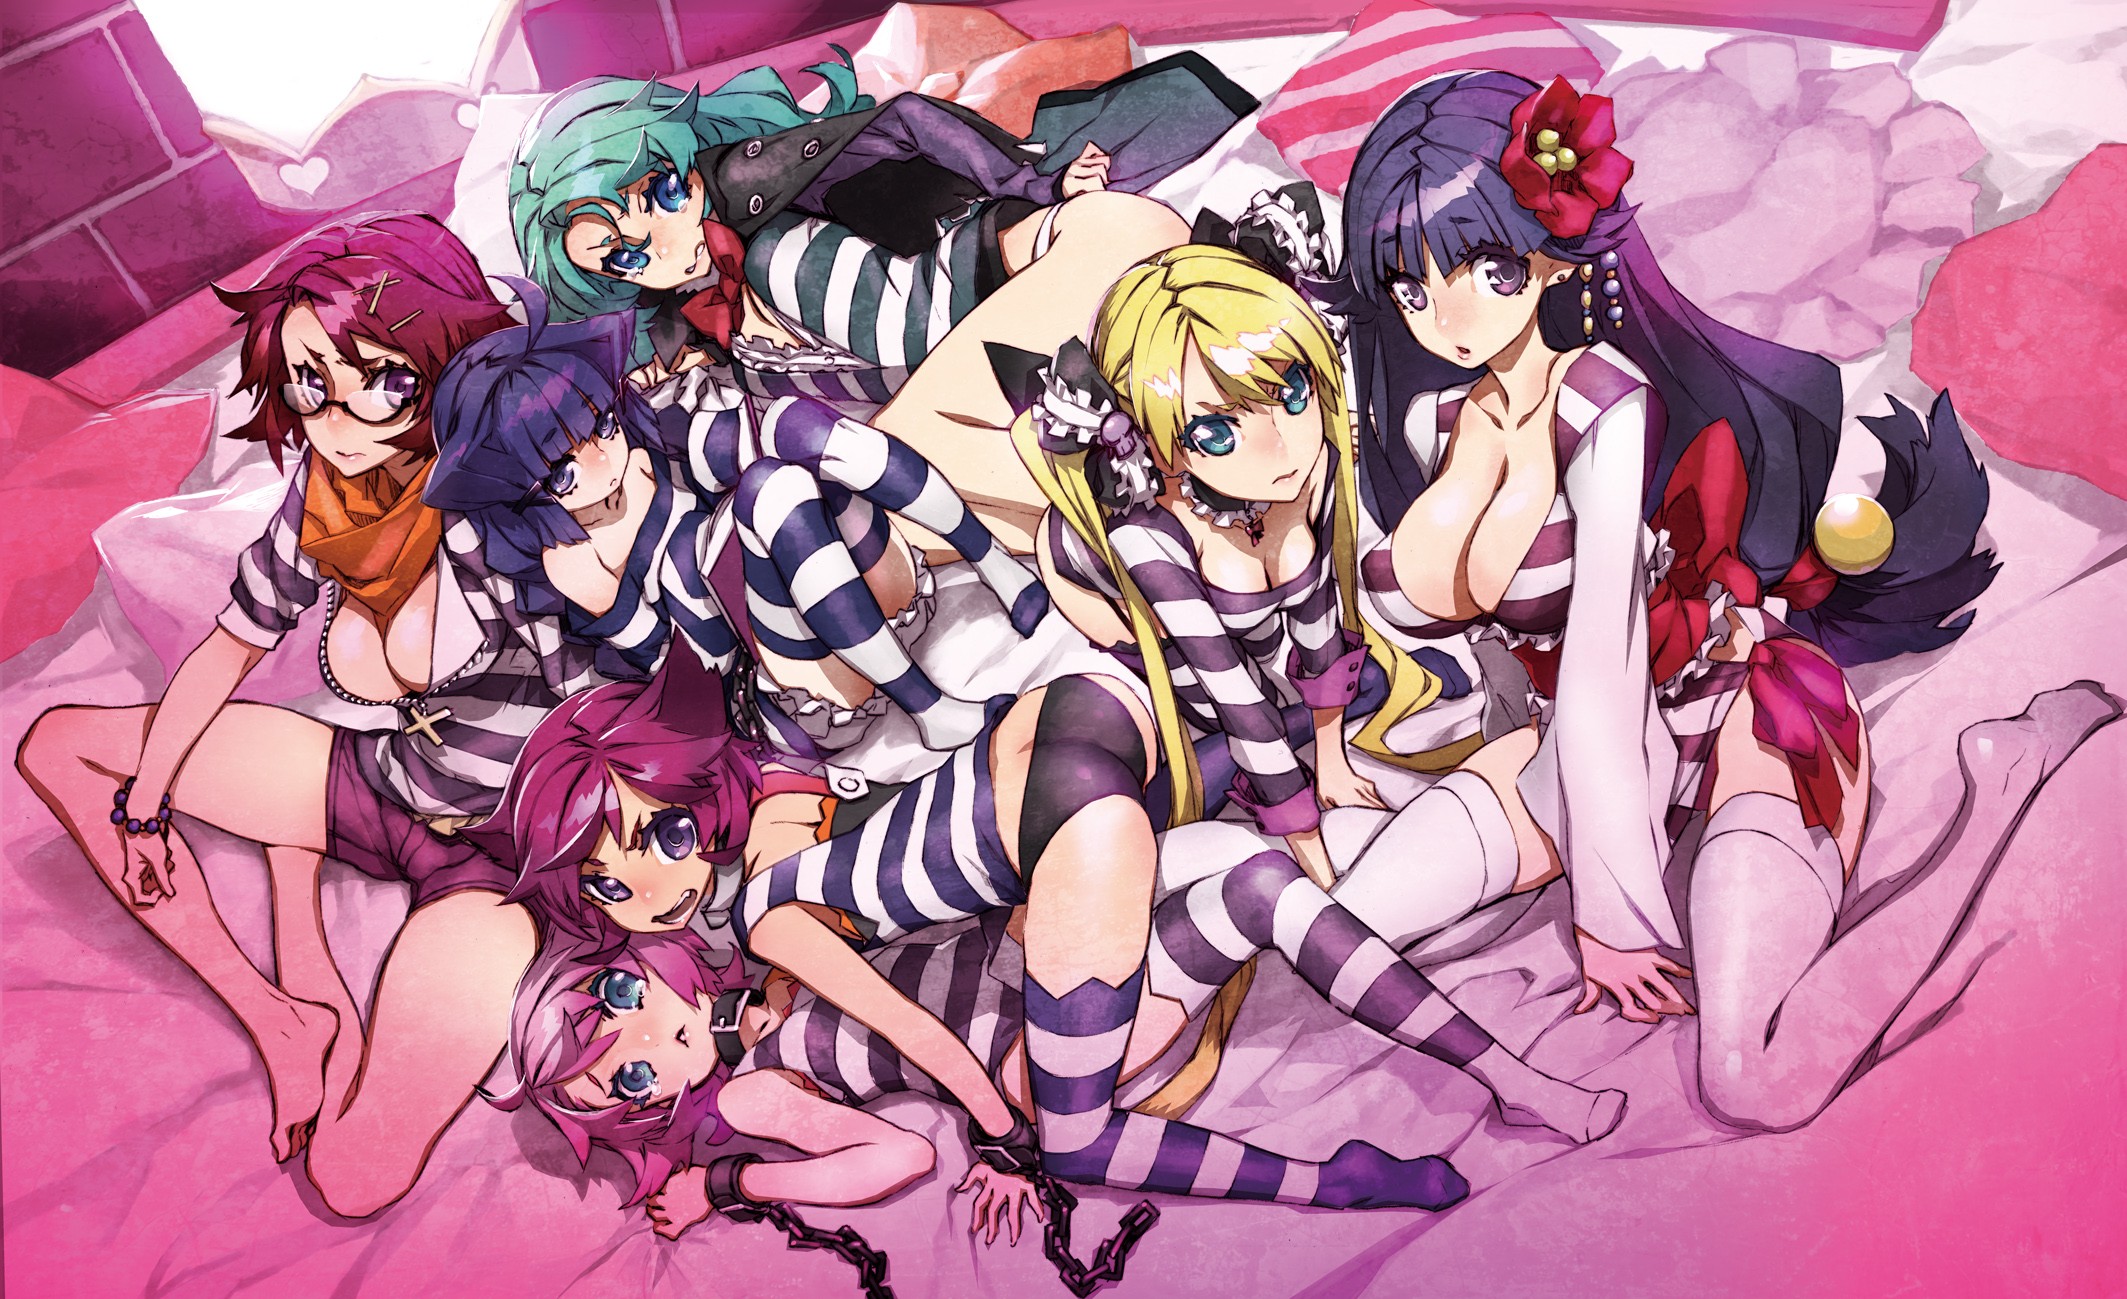 Anime 2127x1299 striped clothing anime girls ass panties kneeling big boobs flower in hair purple hair barefoot chains long hair blue eyes group of women stockings boobs thighs together anime women women with glasses curvy underwear lingerie